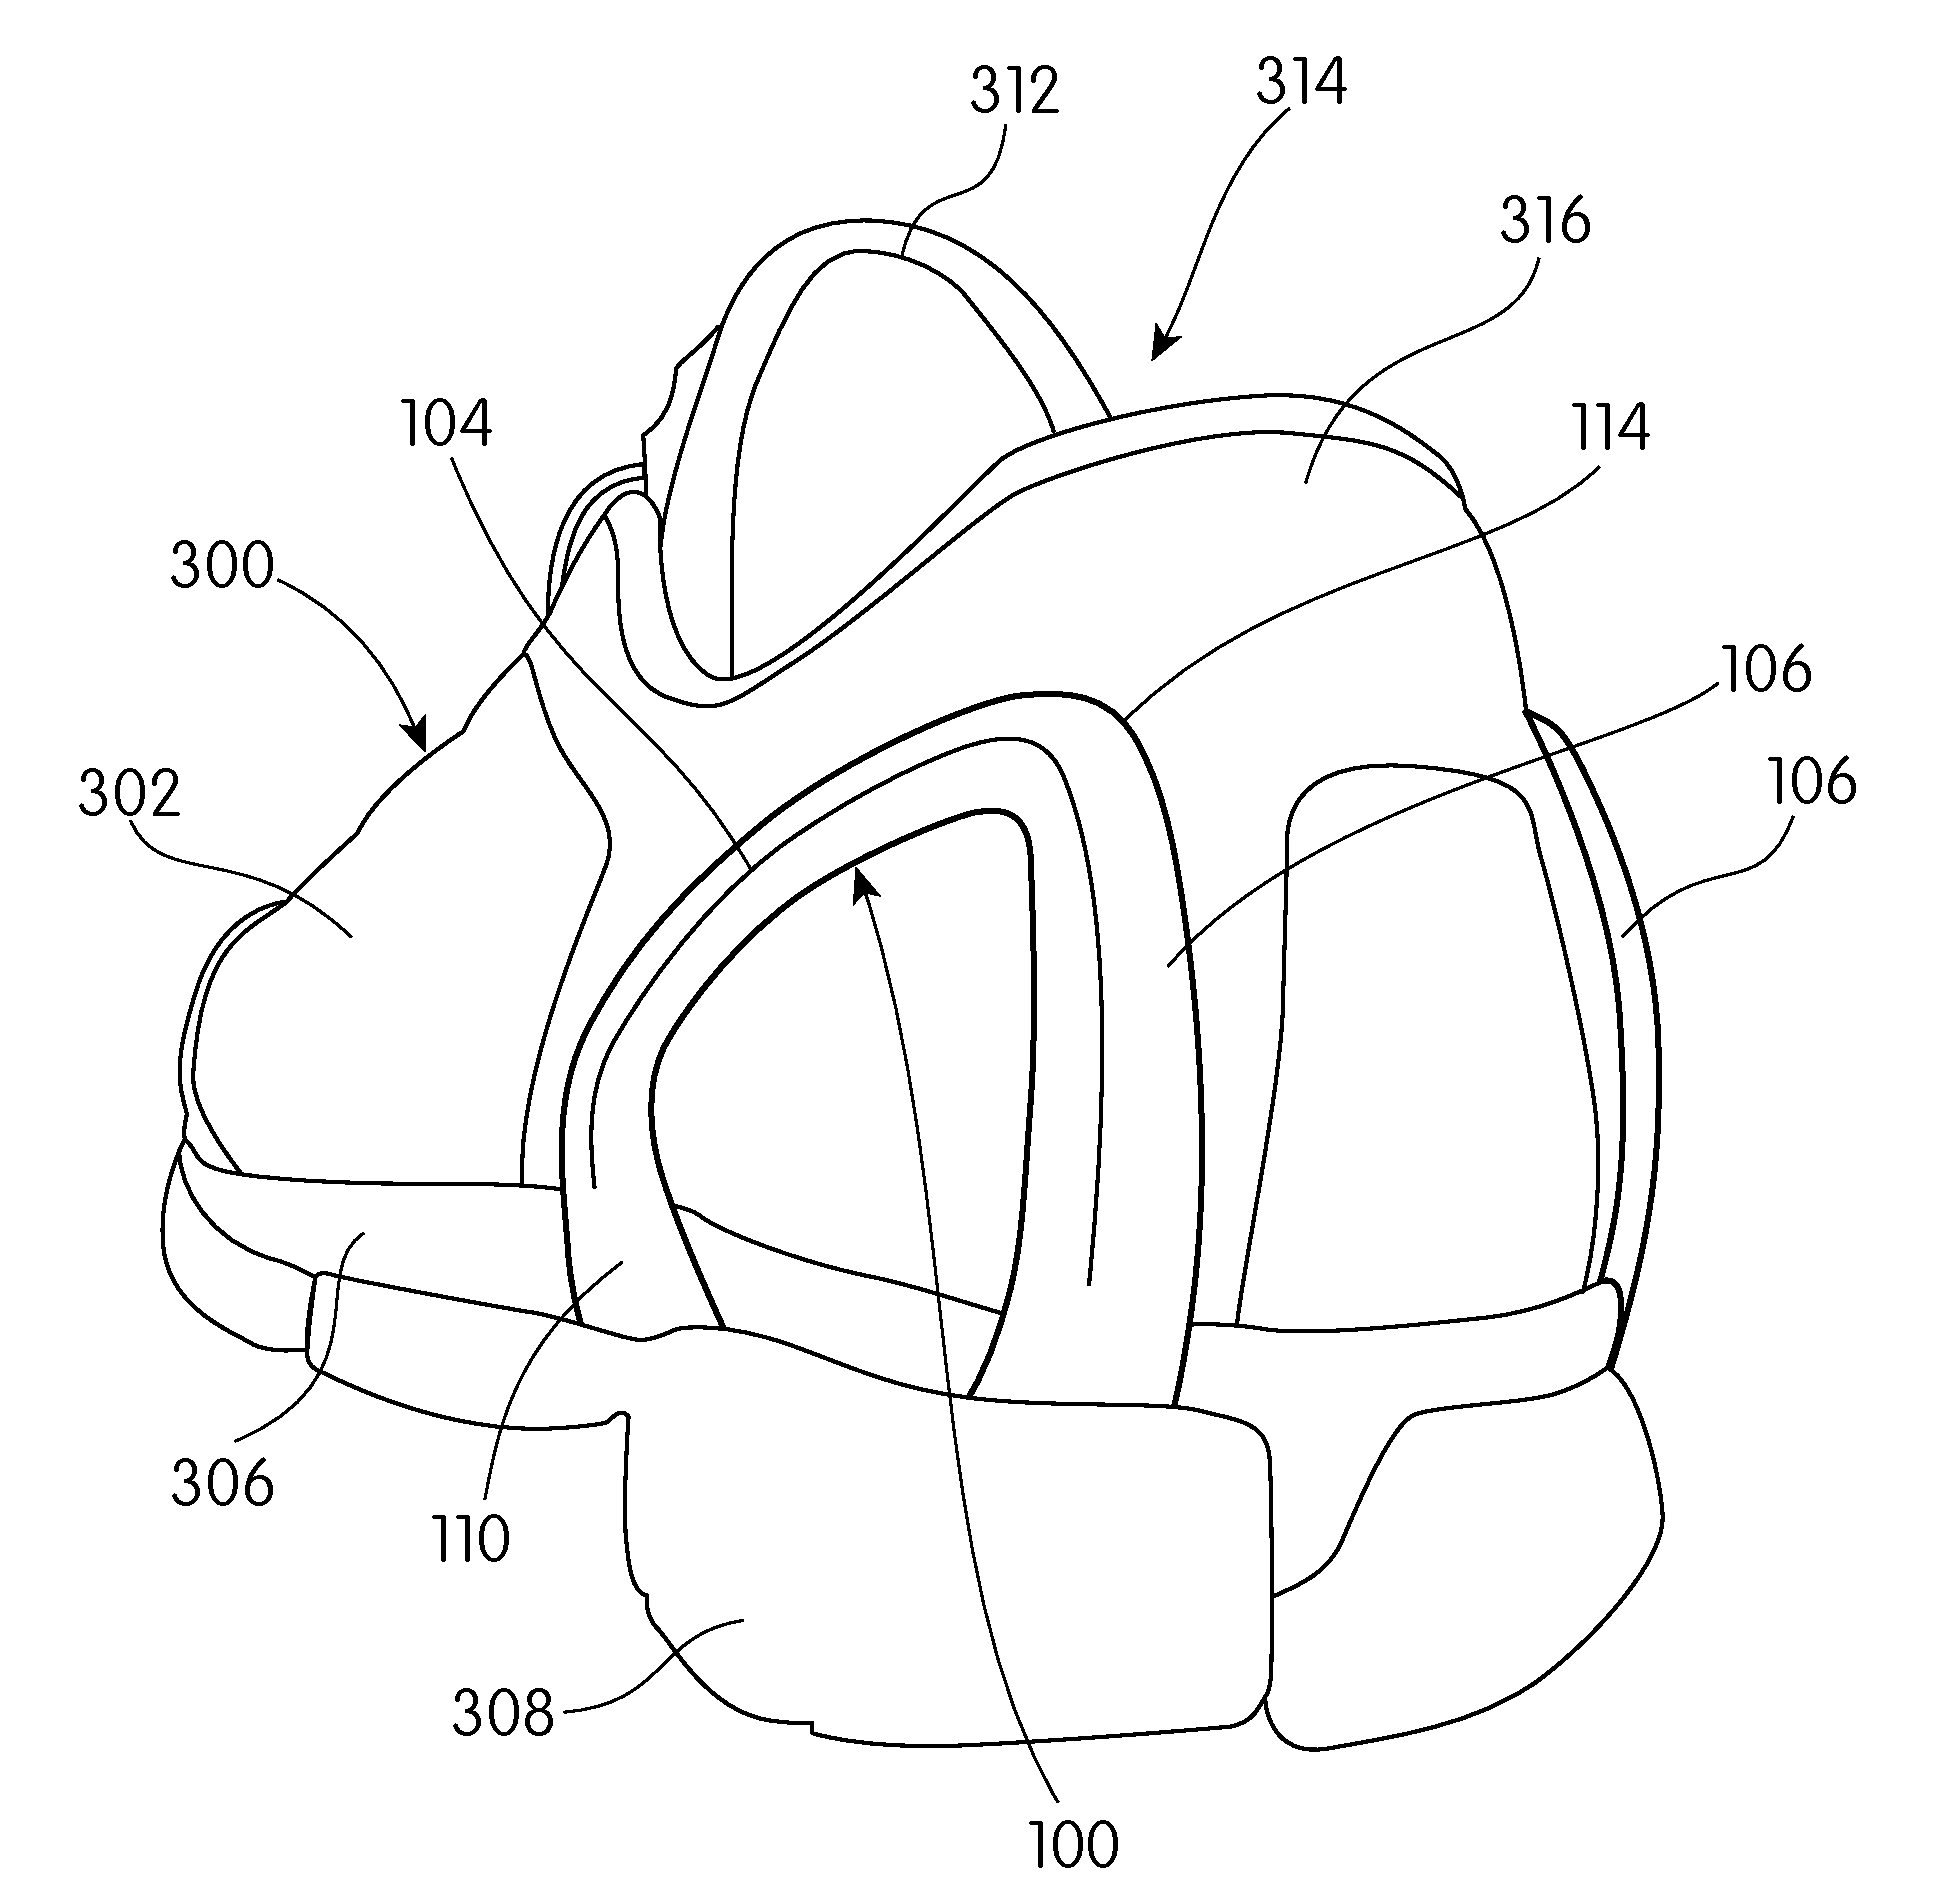 Footwear With Integrated Biased Heel Fit Device